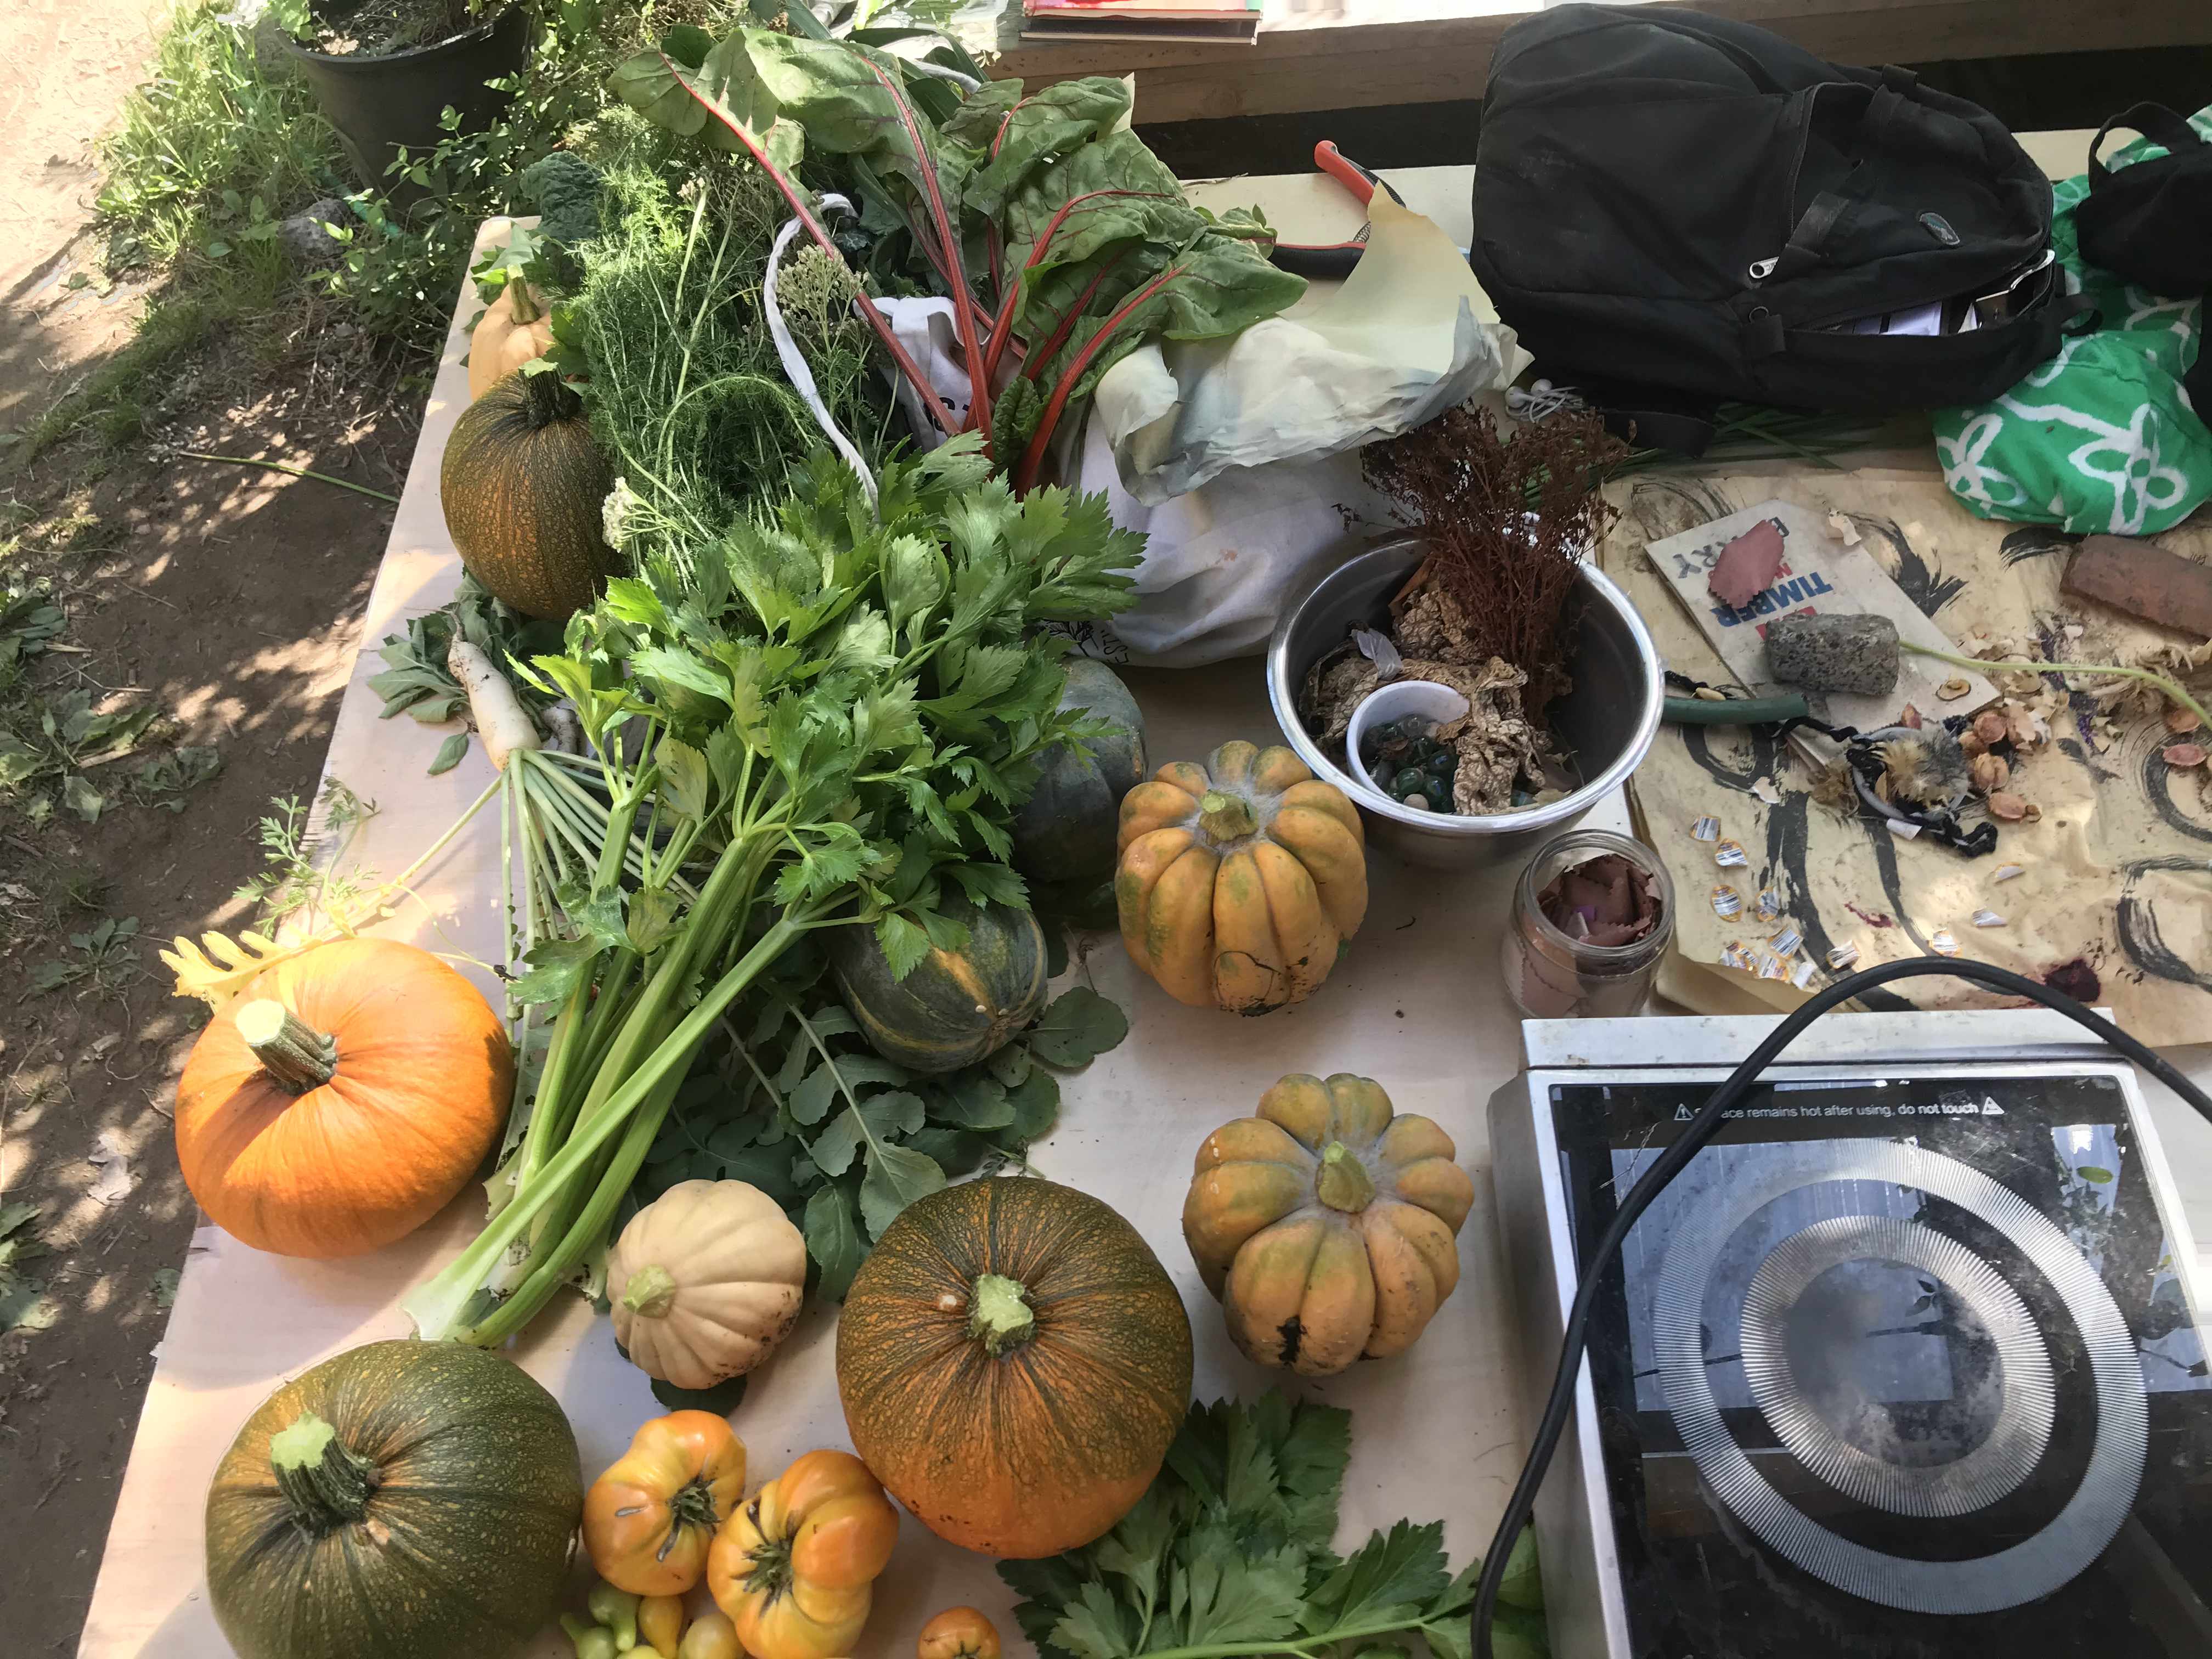 another photo of the tabletop with the vegatation harvested this year at the garde, showing a dozen pumpkins in various sizes, none bigger than a basketball. Aslo visible is Derya's green shirt and black backpack as well as a bowl filled with fried seeds